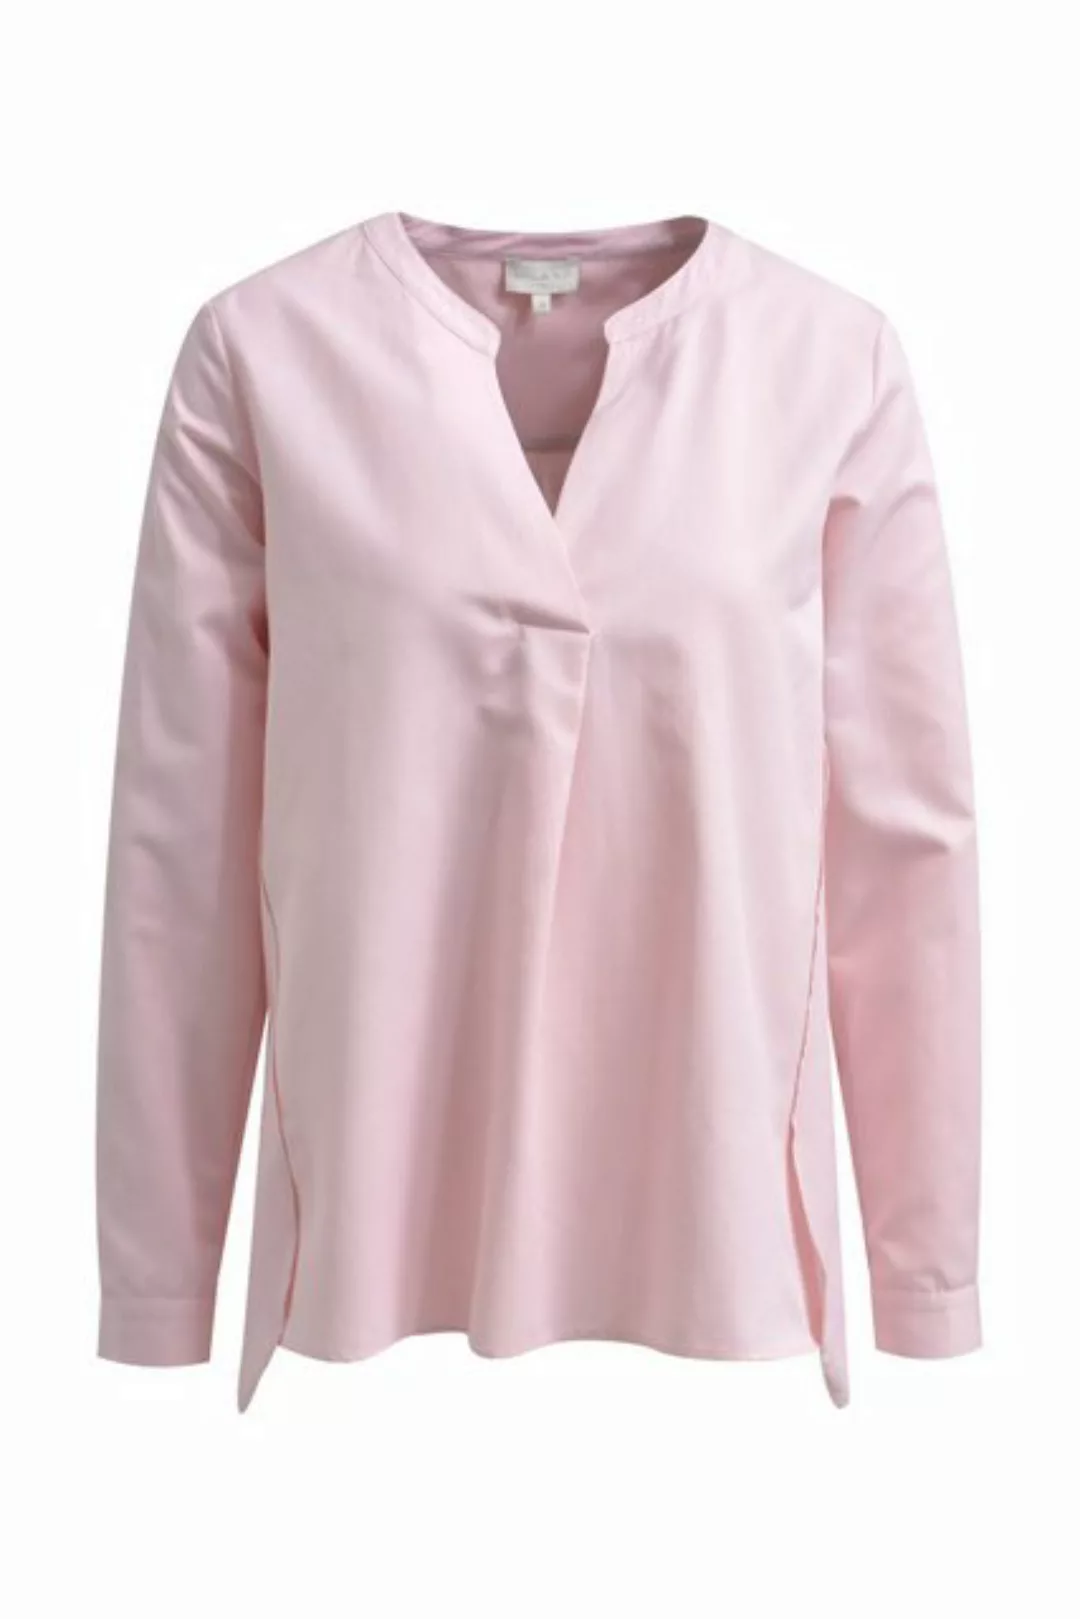 MILANO ZONE Kurzarmbluse Blouse with V-Neck and pleat at cf günstig online kaufen